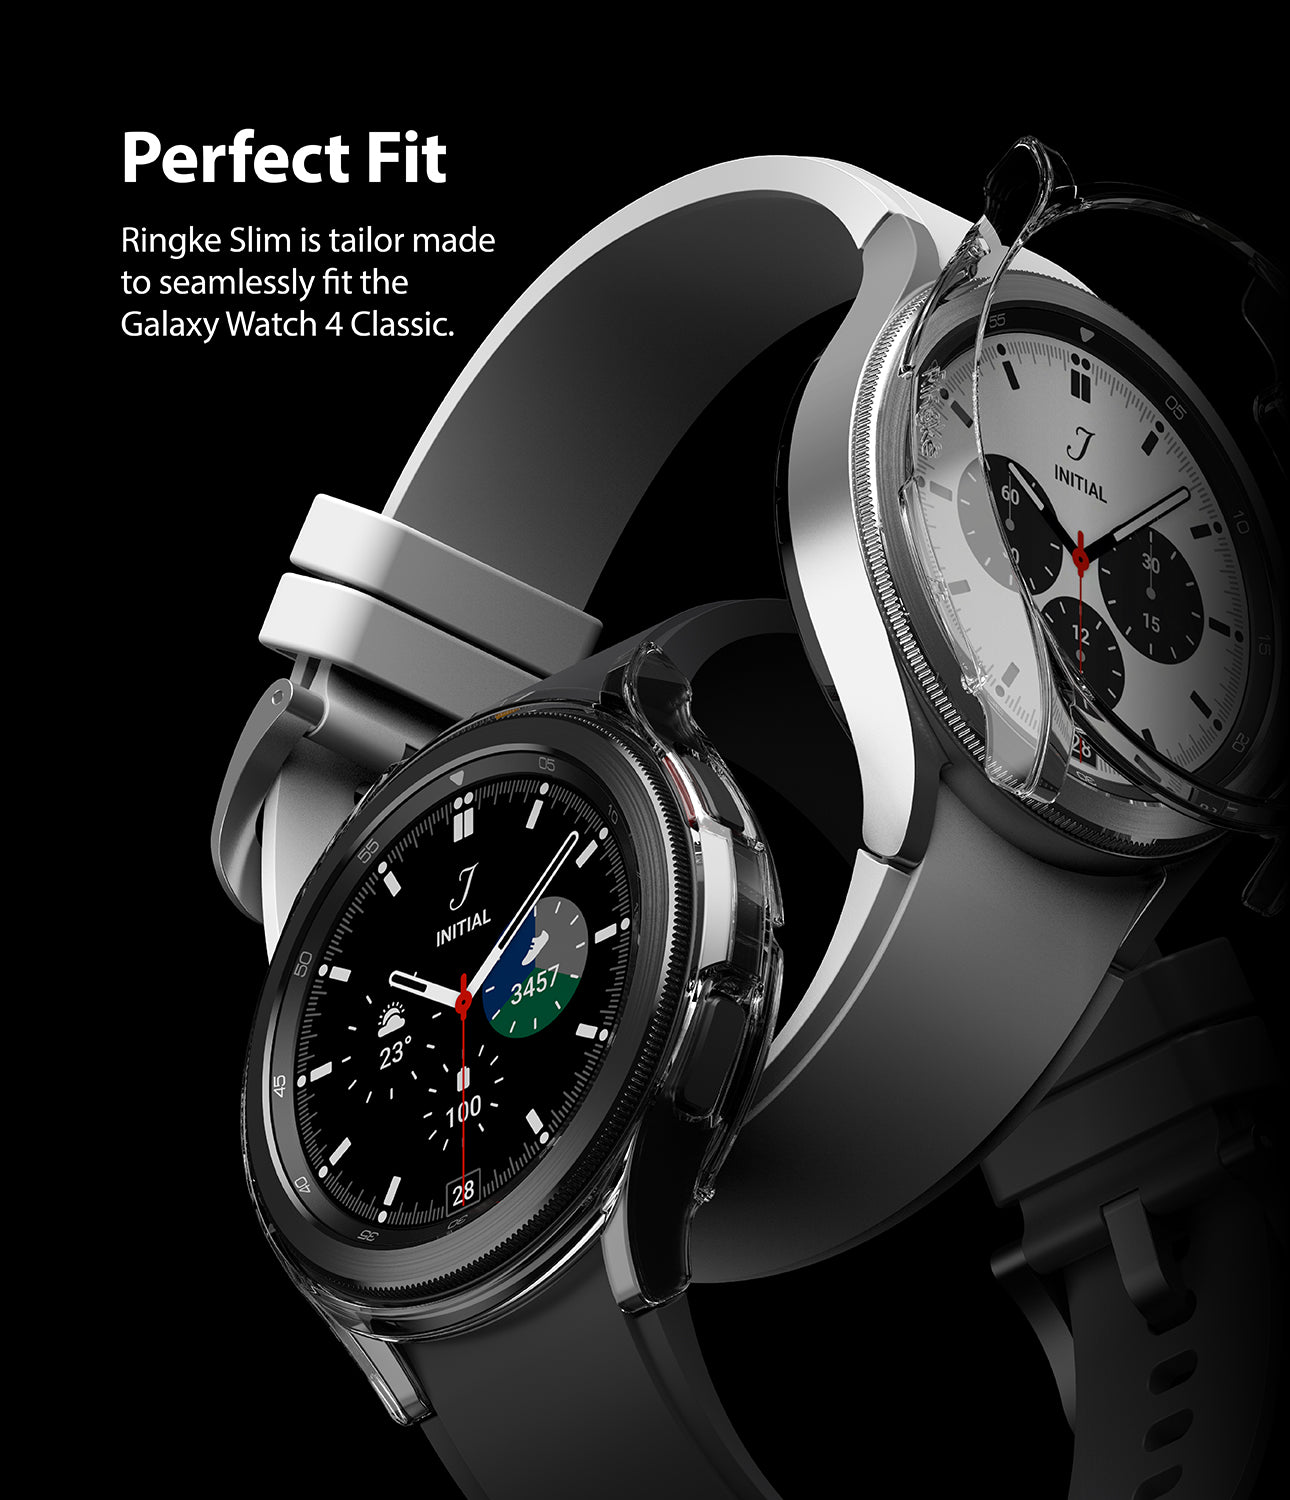 tailor made to fit the Galaxy Watch 4 Classic 42mm